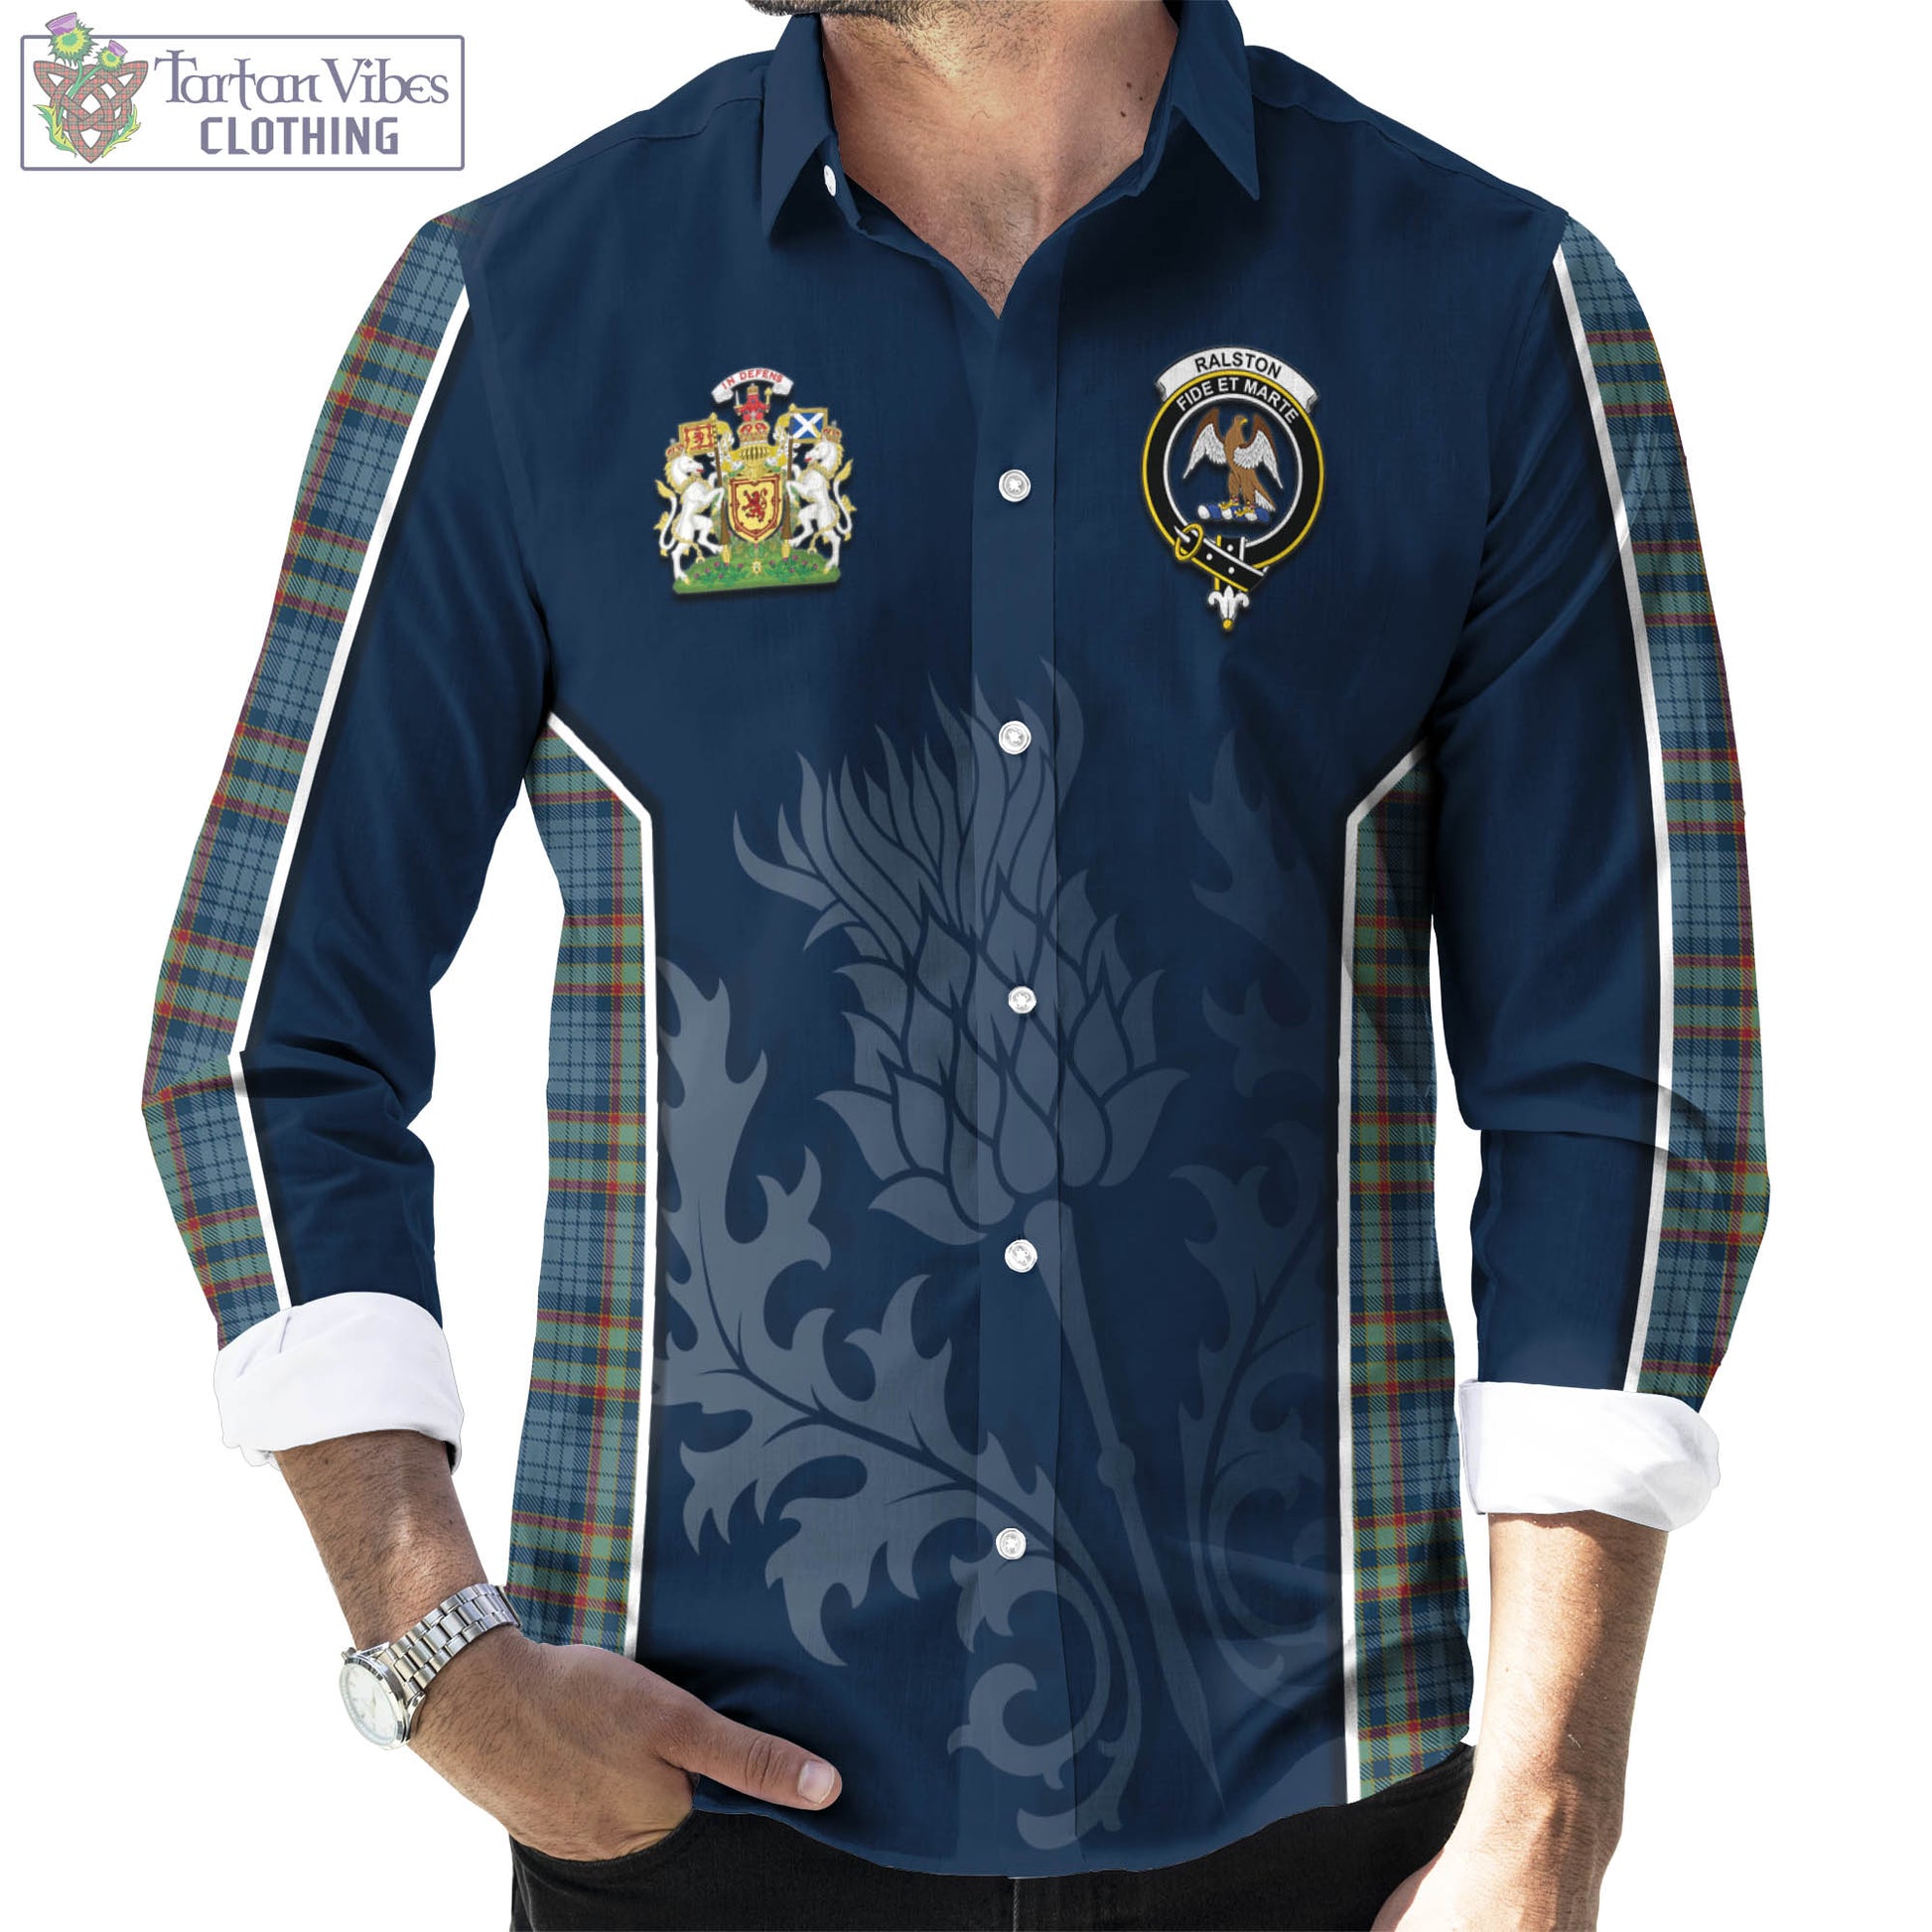 Tartan Vibes Clothing Ralston UK Tartan Long Sleeve Button Up Shirt with Family Crest and Scottish Thistle Vibes Sport Style